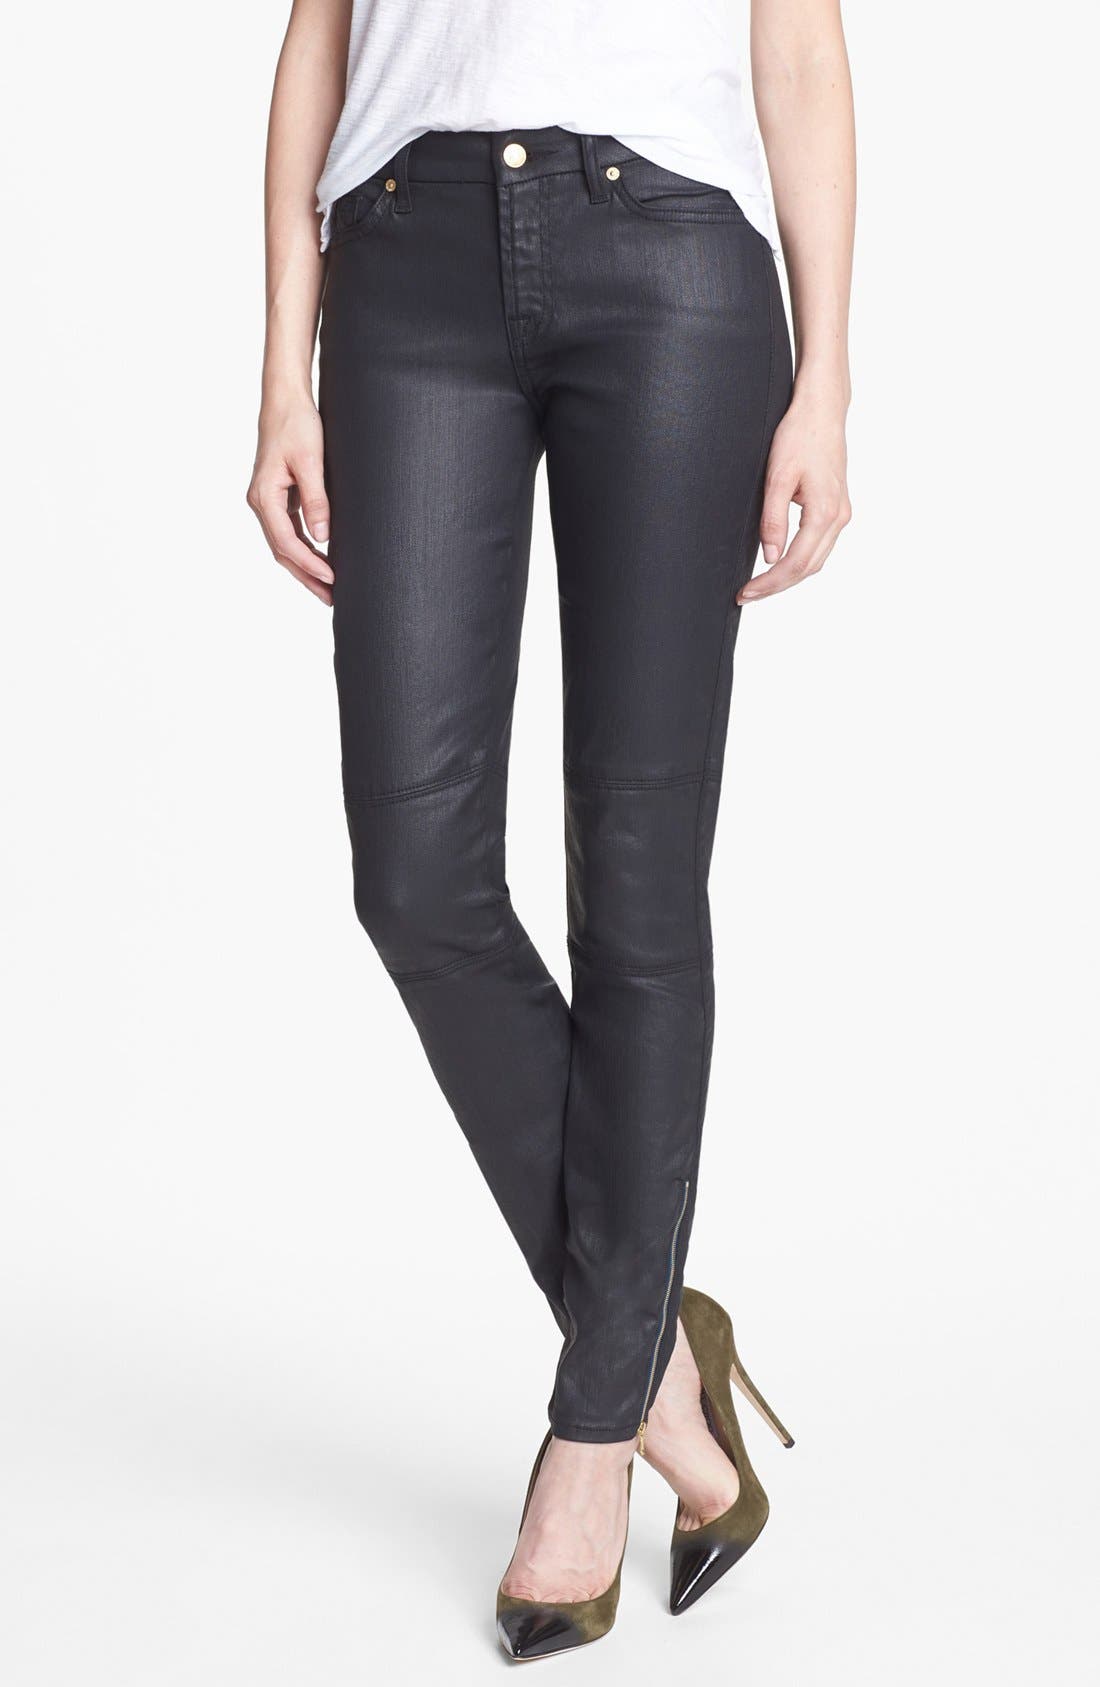 7 for all mankind coated jeans